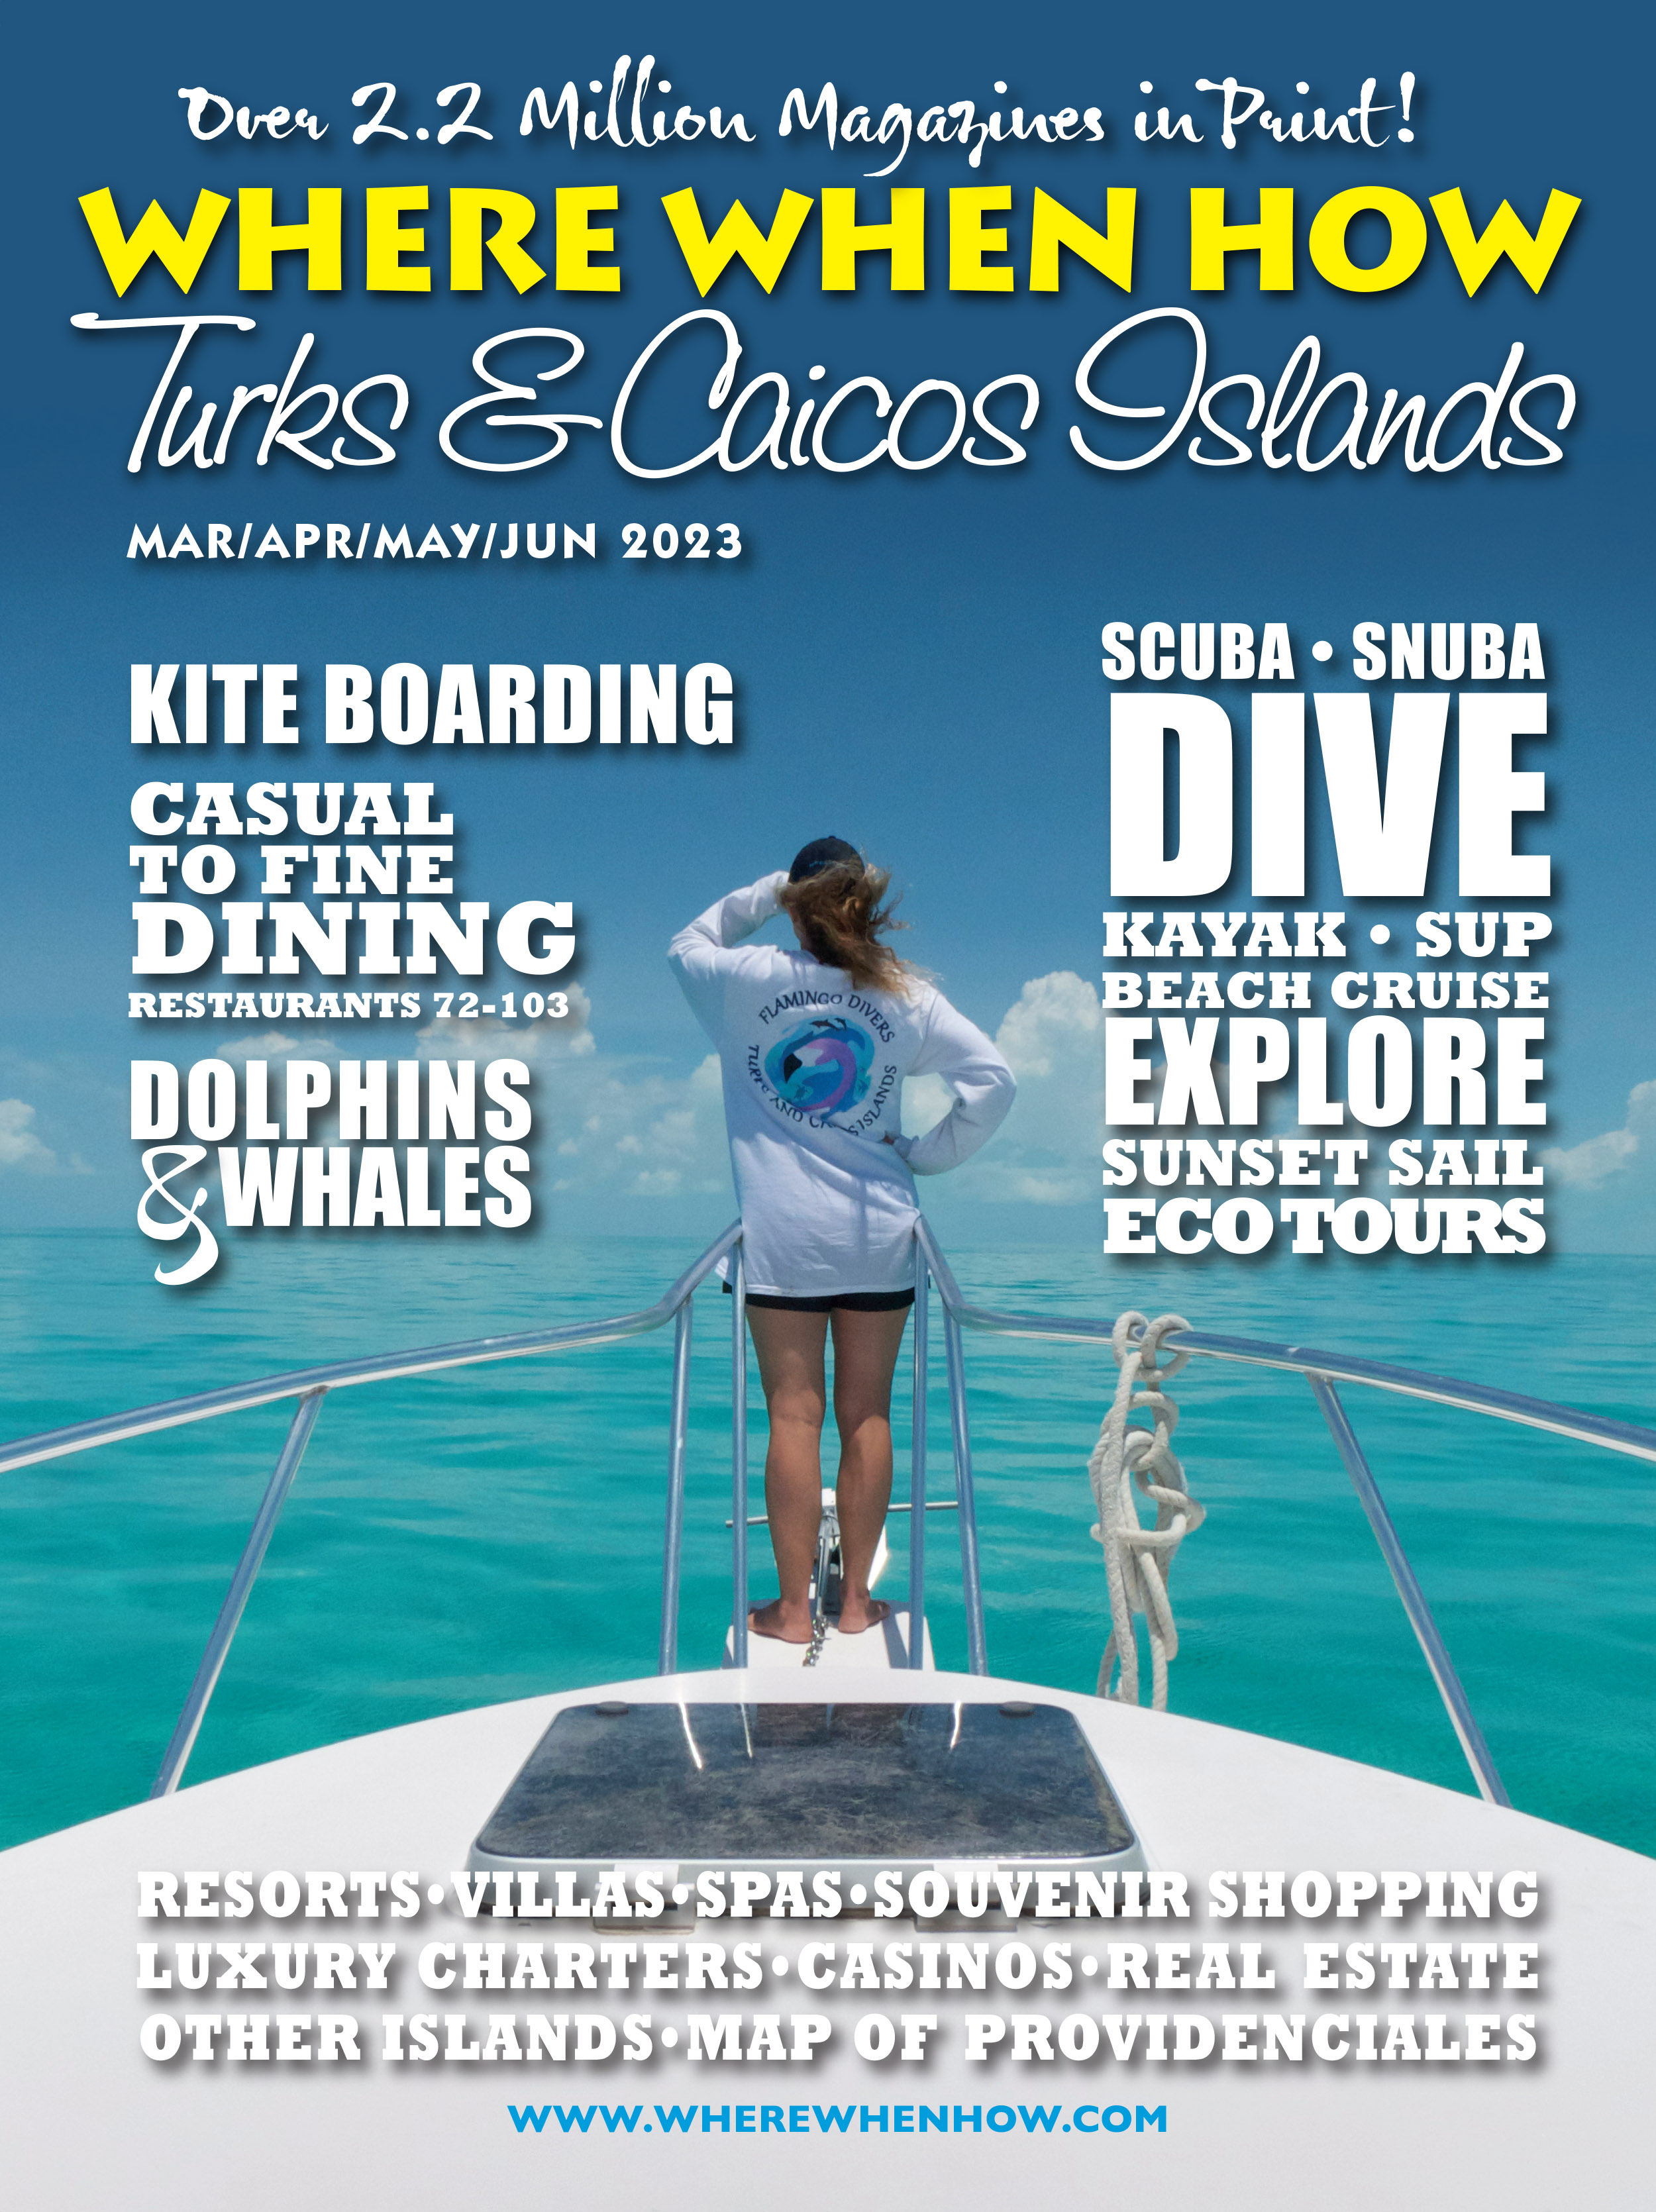 Click here to read the current issue of Where When How - Turks and Caicos Islands magazine